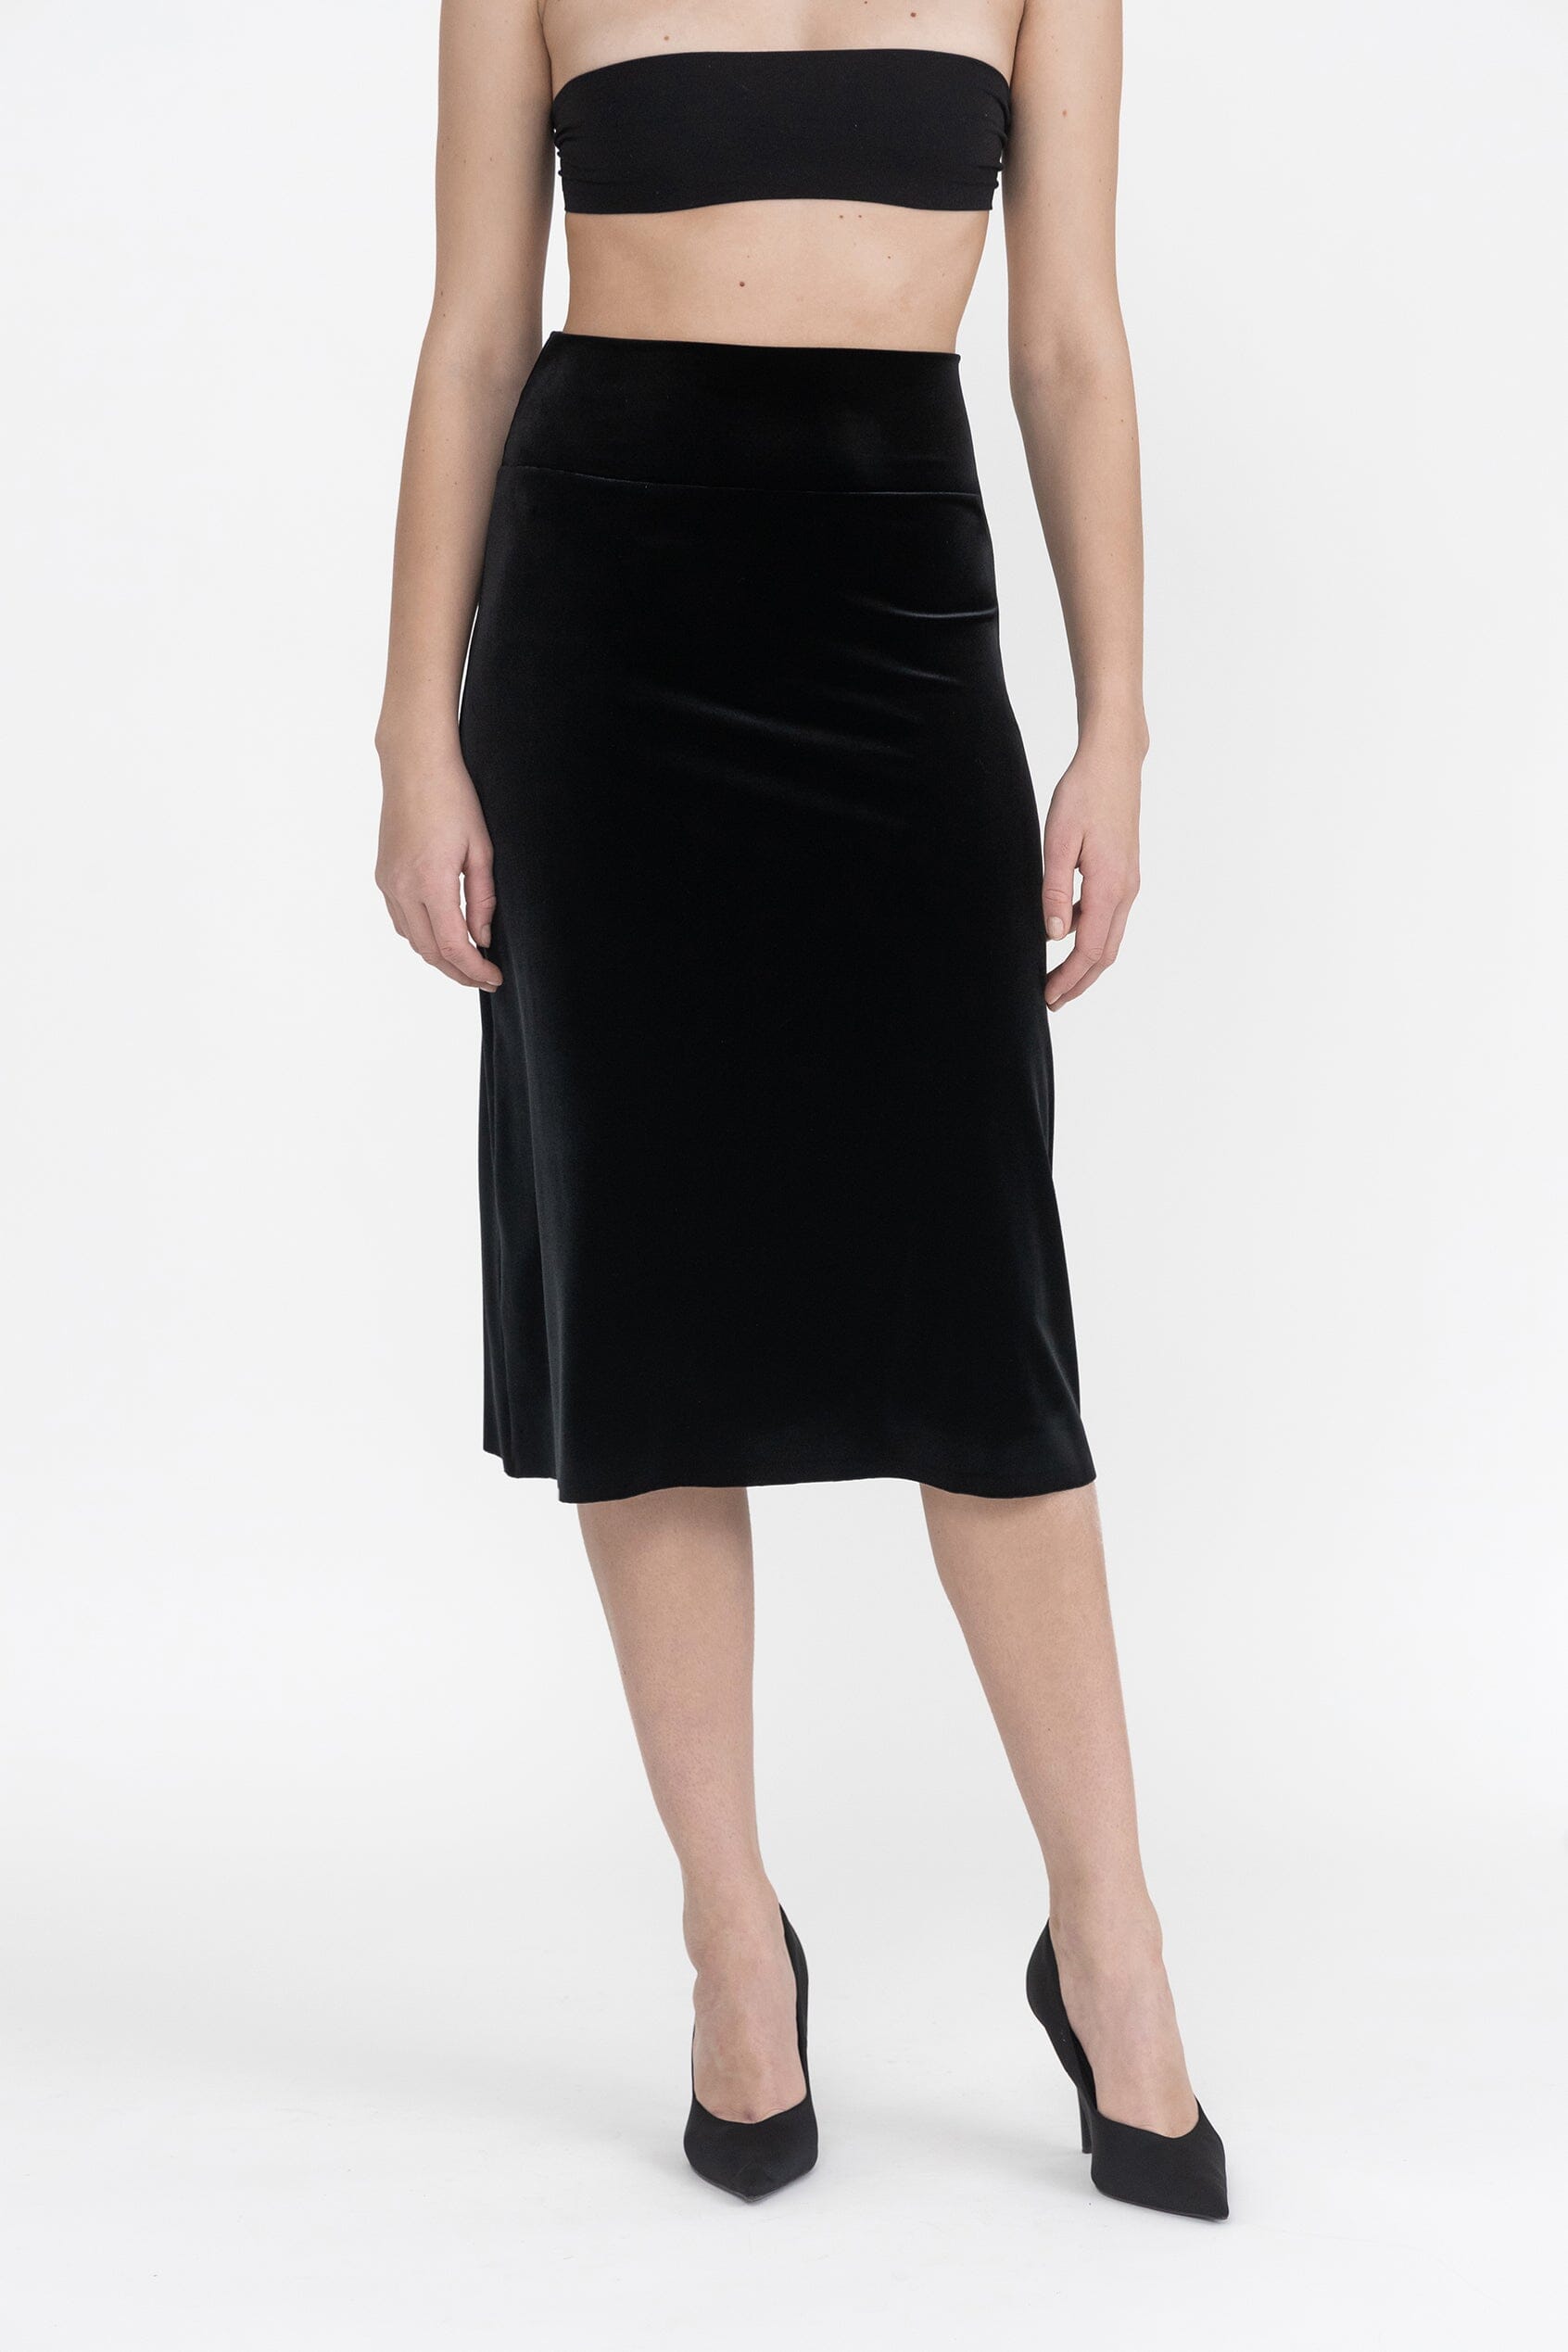  Dare To Feel two-piece skirt Black Product Amoralle